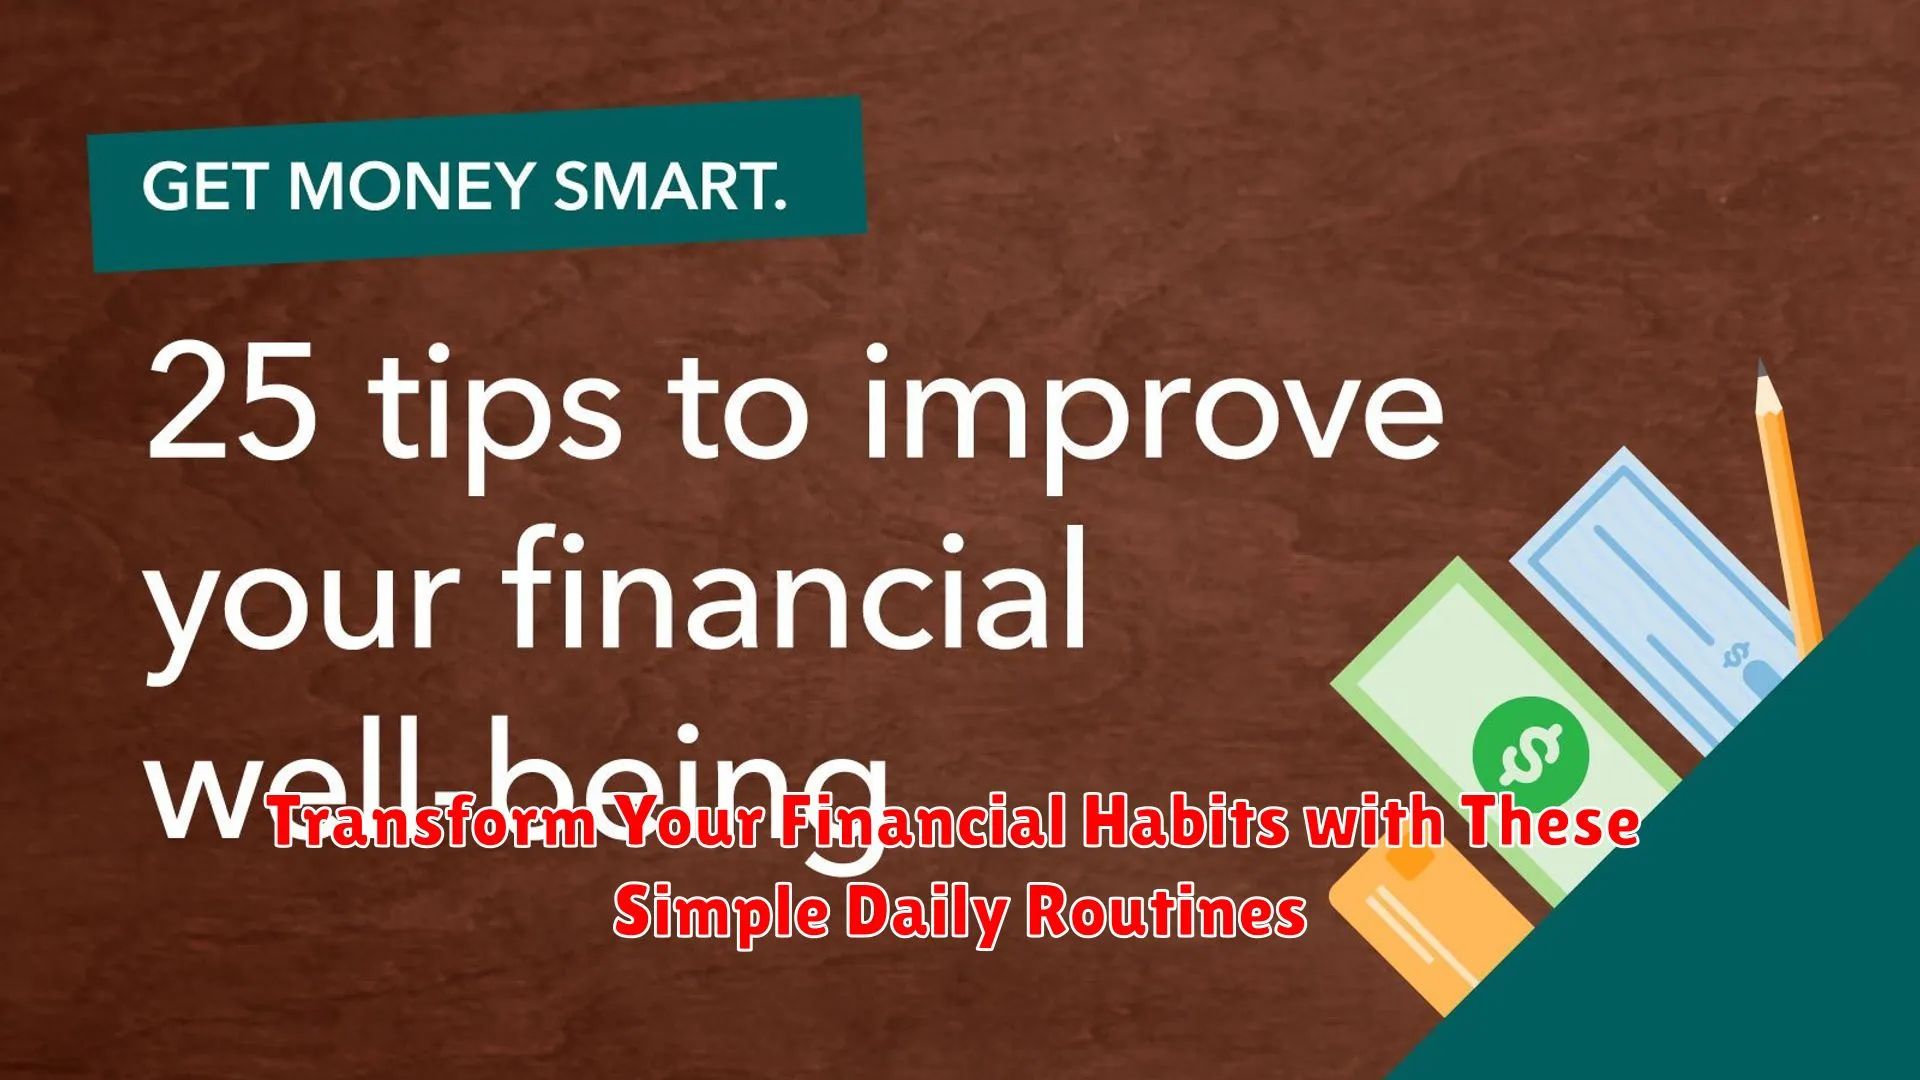 Transform Your Financial Habits with These Simple Daily Routines